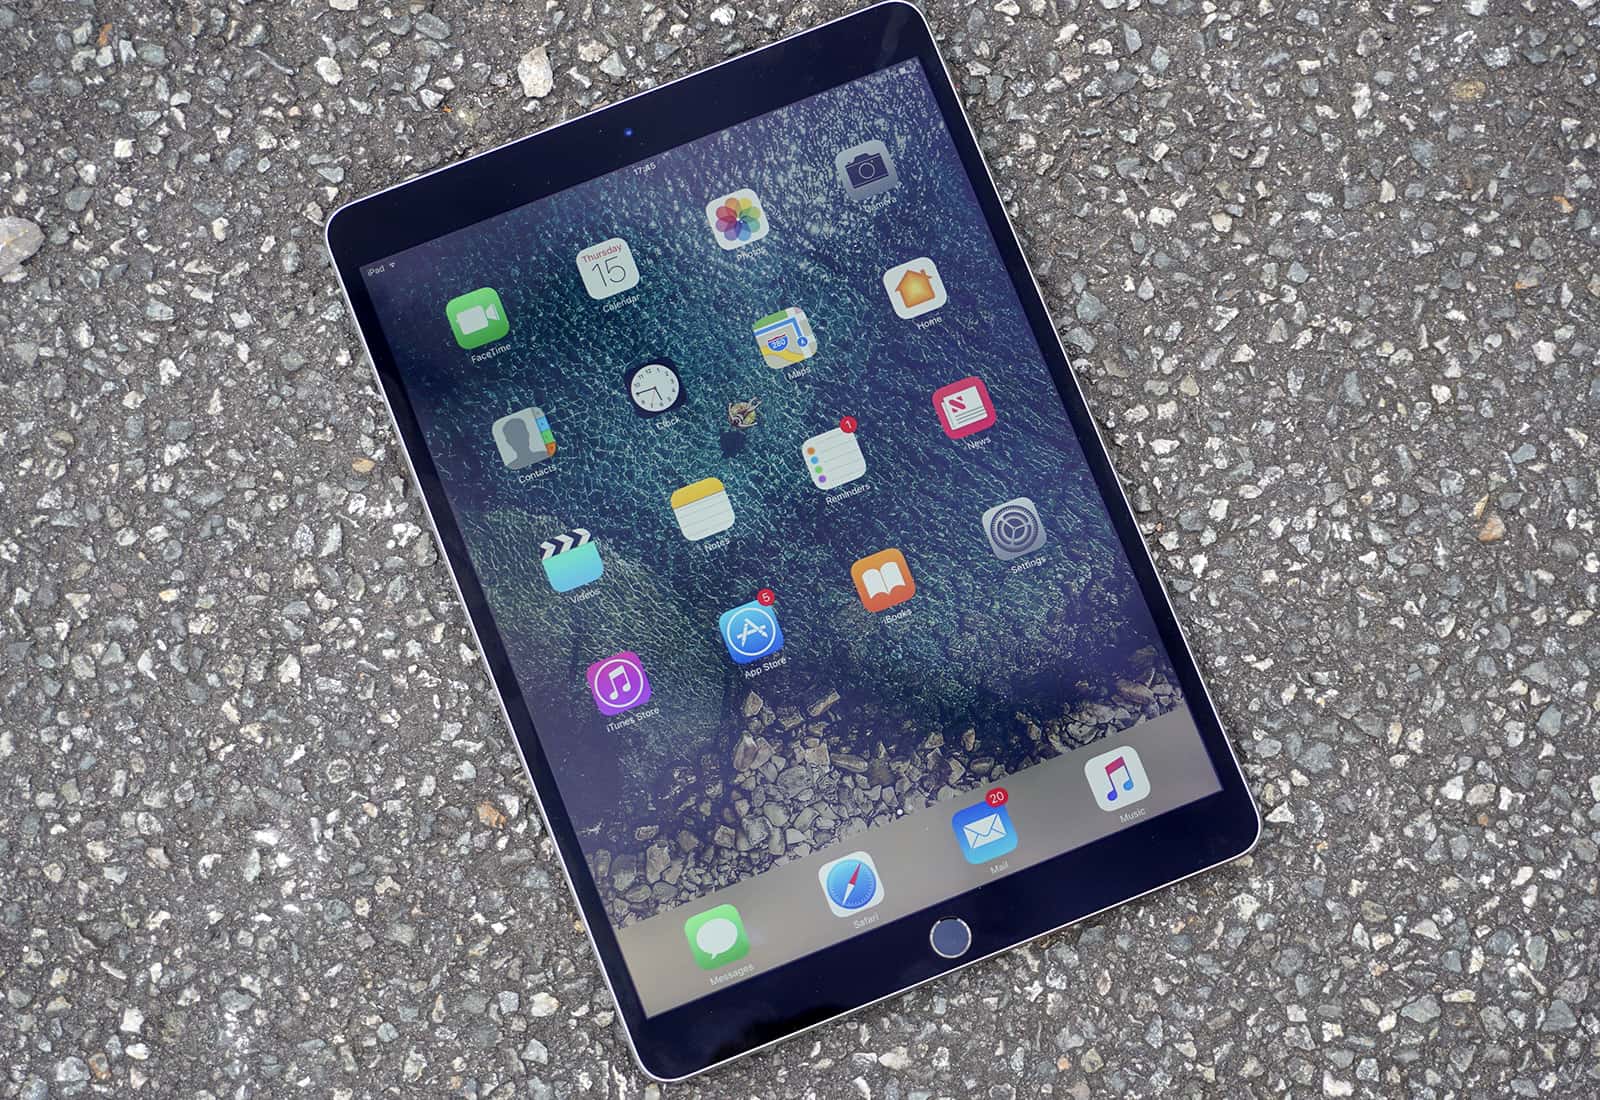 The new 10.5-inch iPad Pro puts monstrous power at your fingertips.